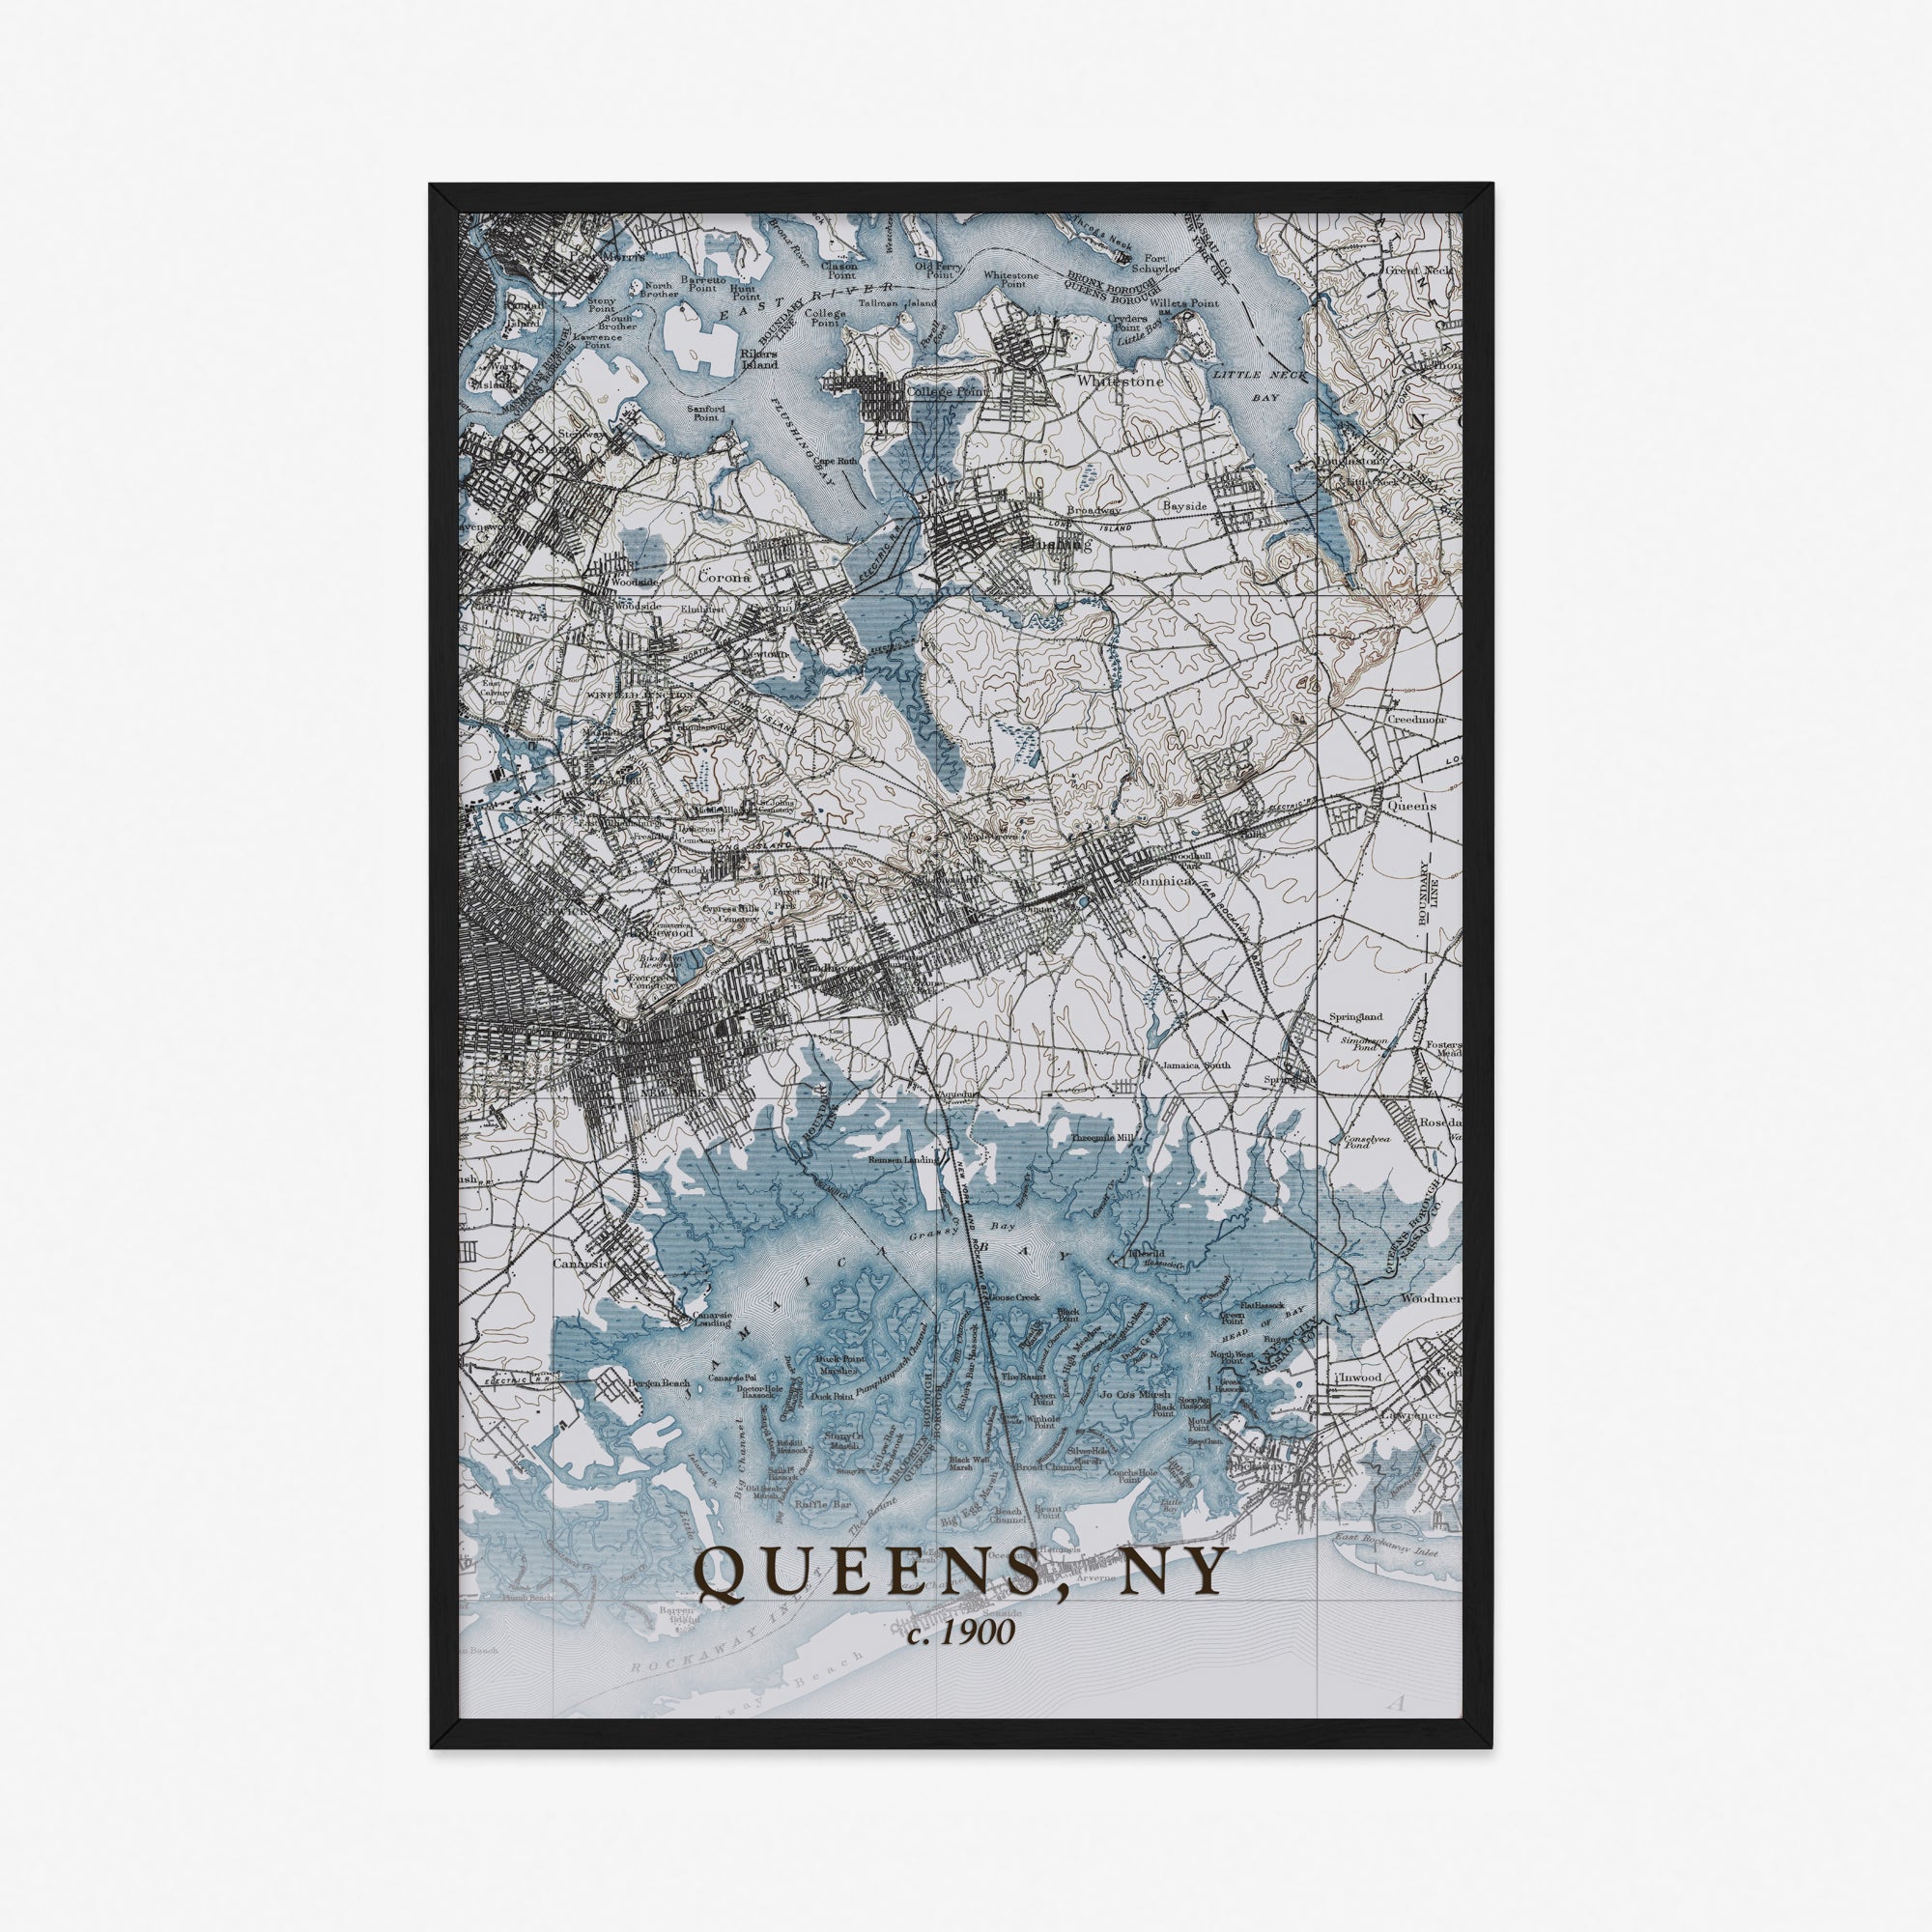 Queens, NY - 1900 Topographic Map